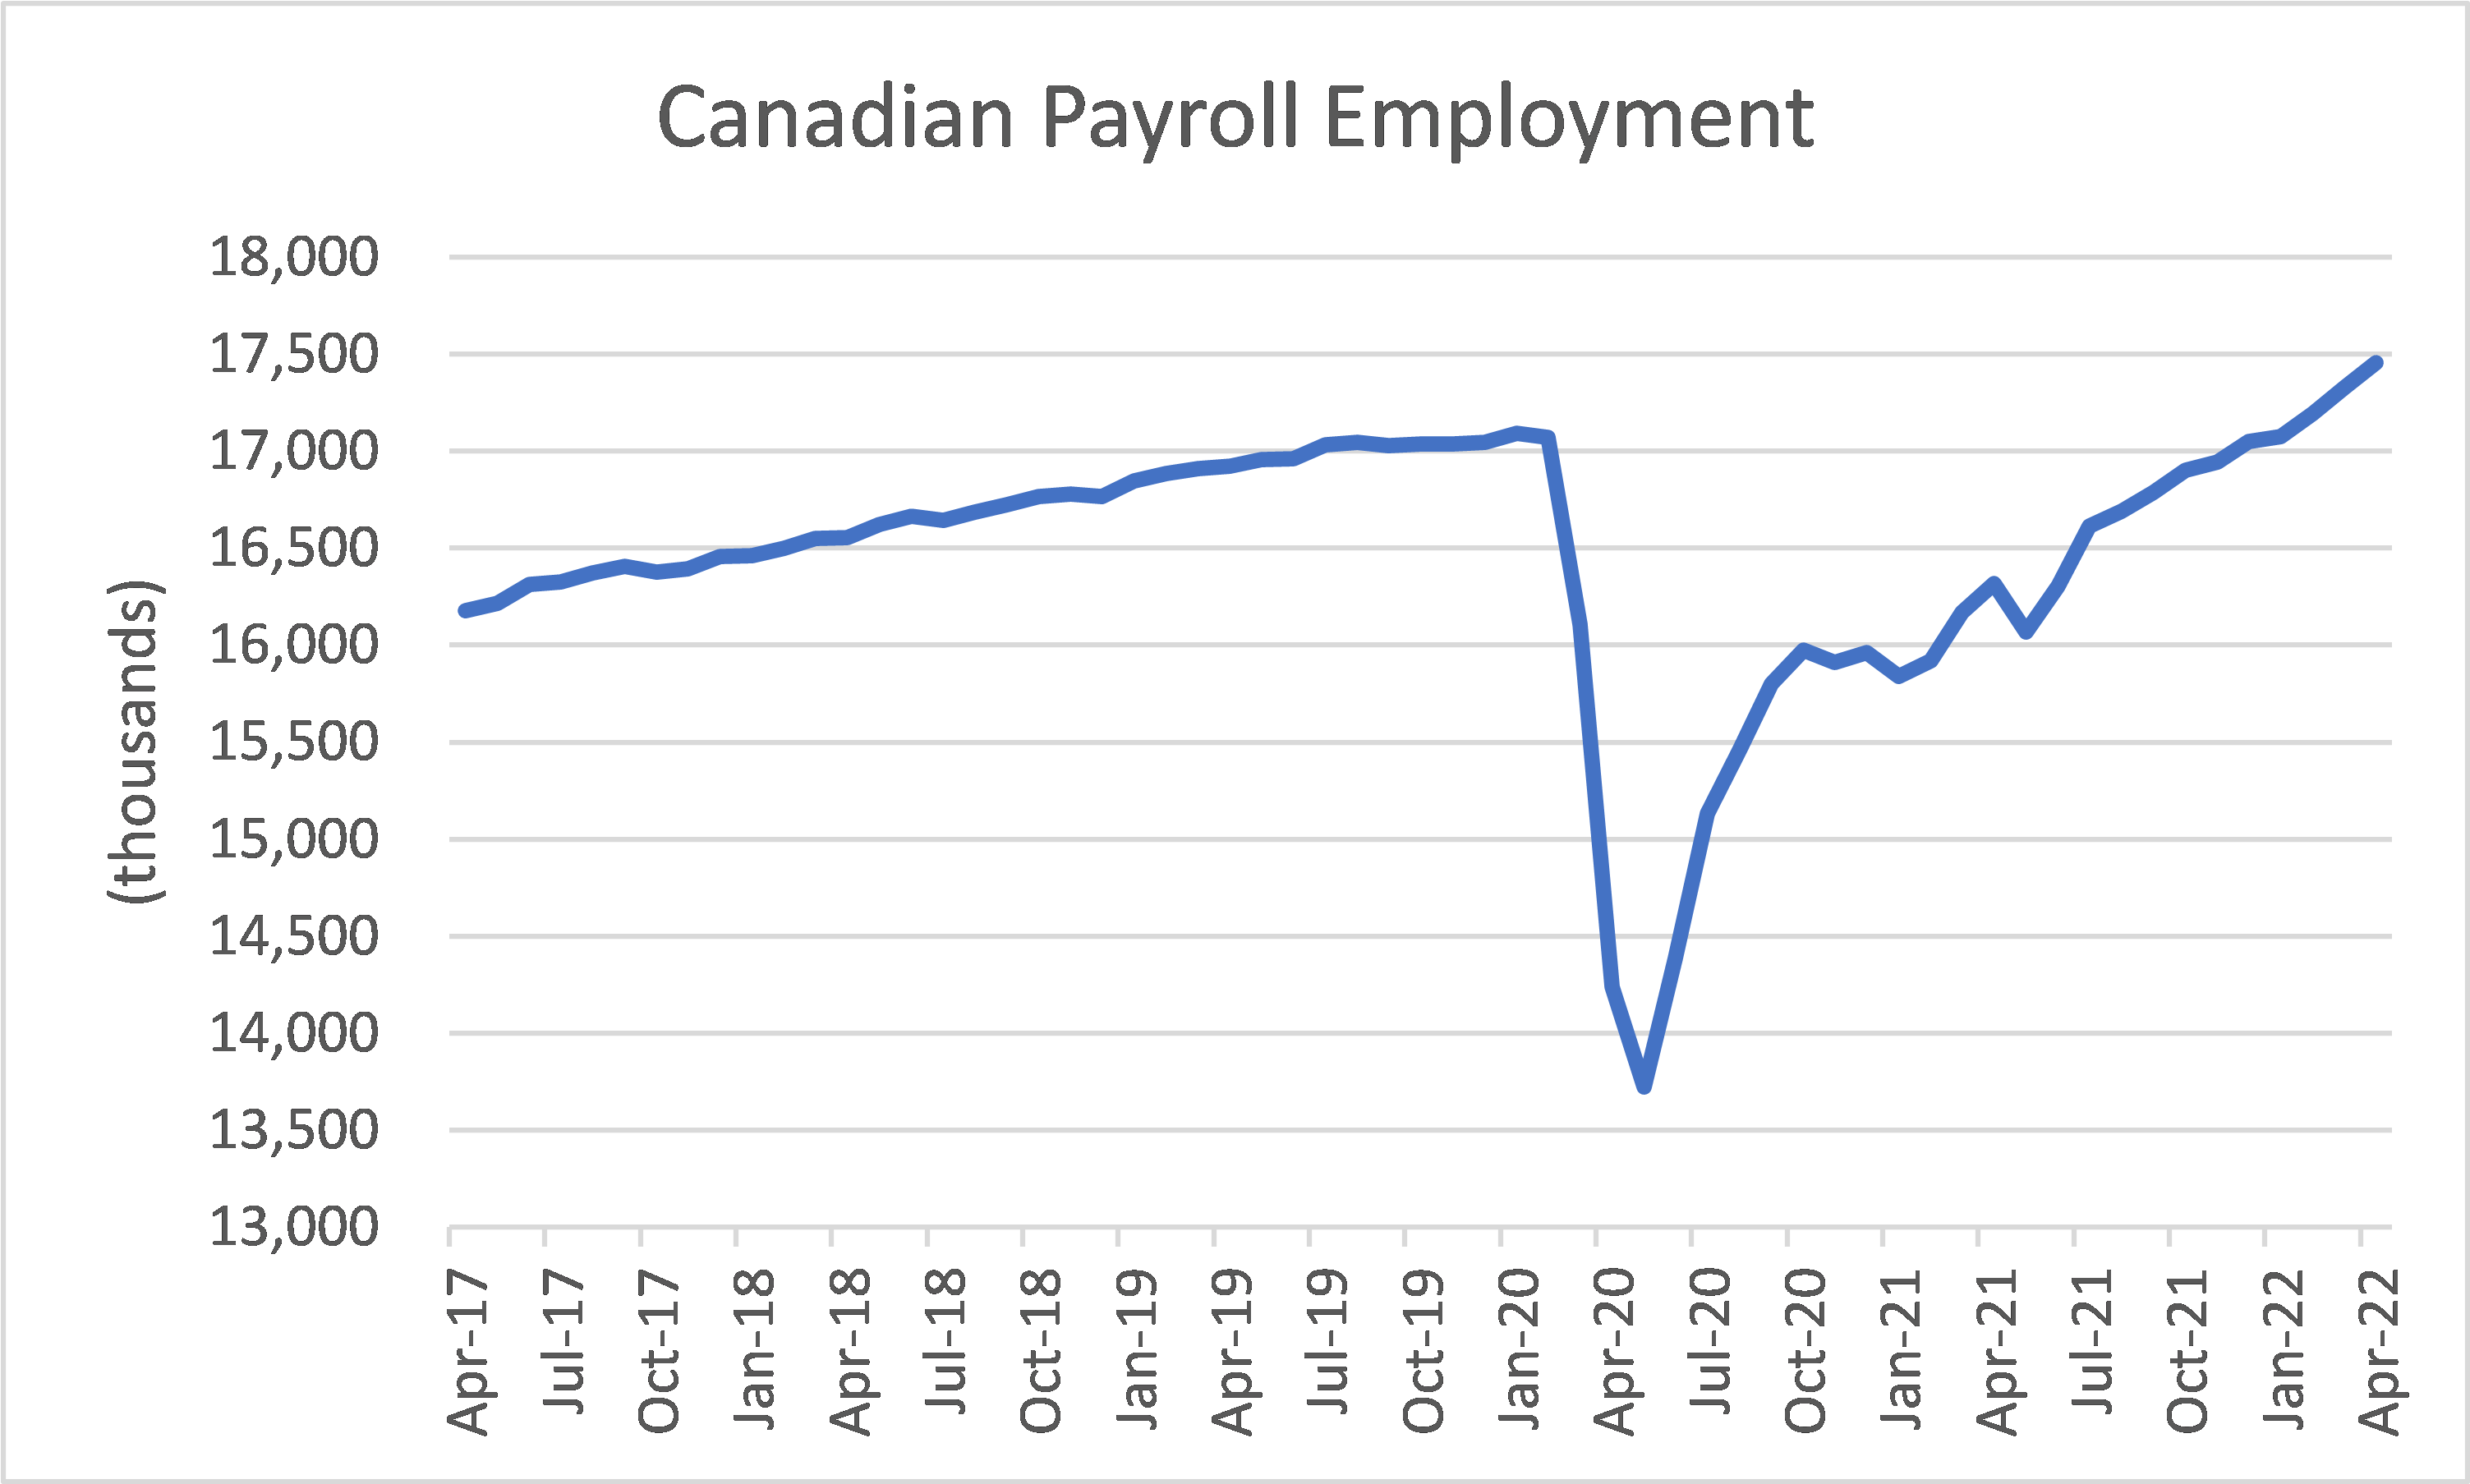 A graph showing Canadian payroll employment